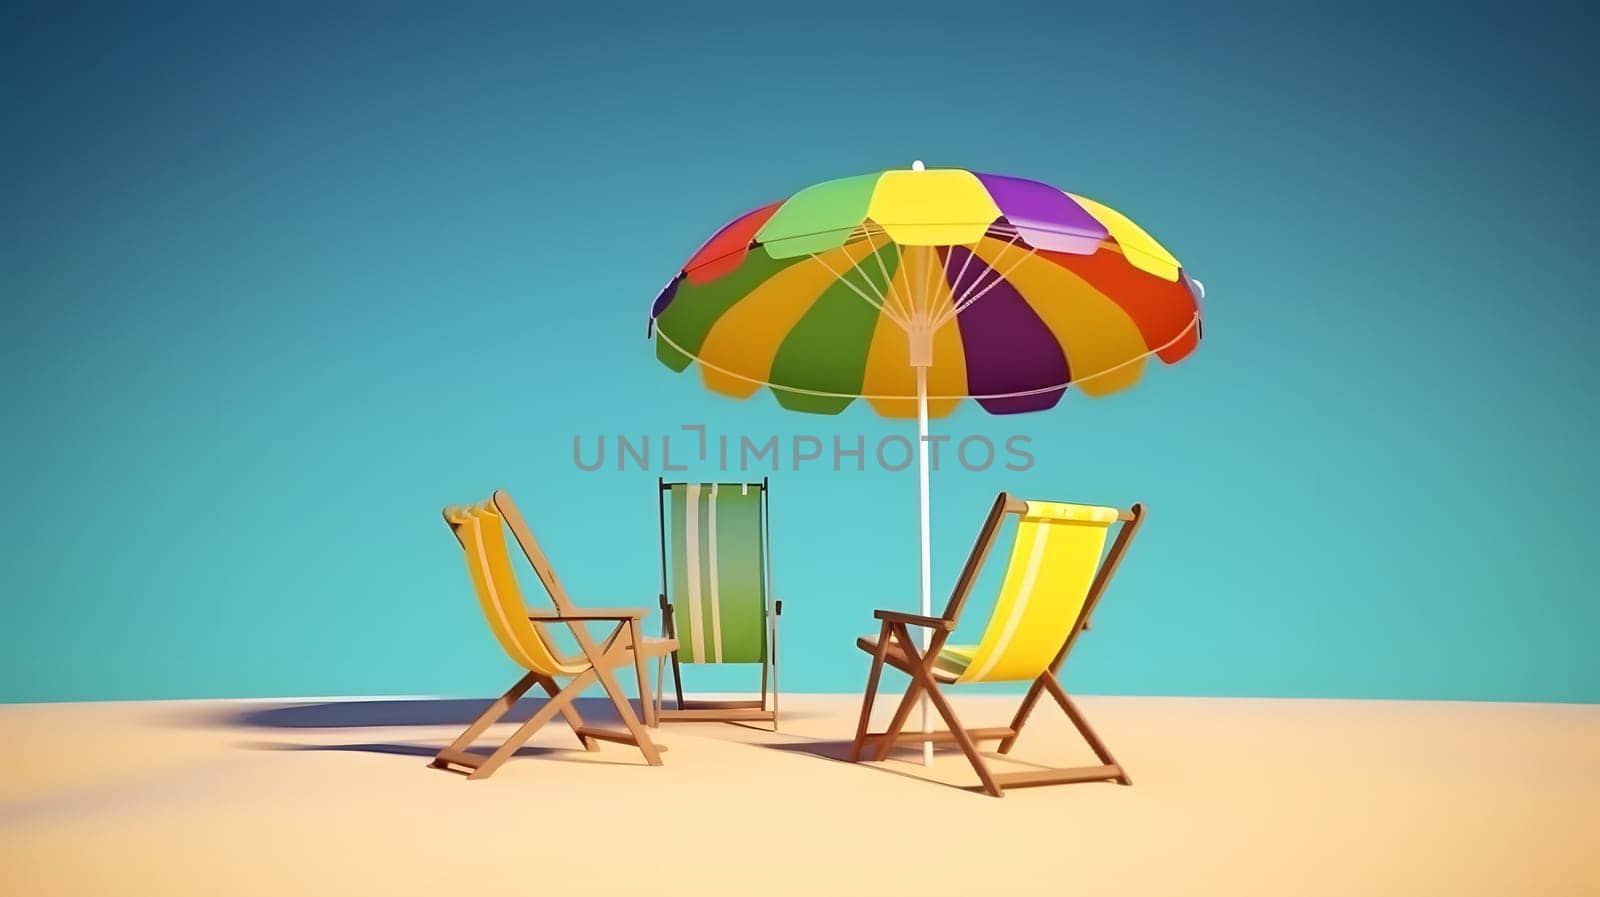 Beach umbrella with chairs on the sand beach - summer vacation theme header, neural network generated art by z1b